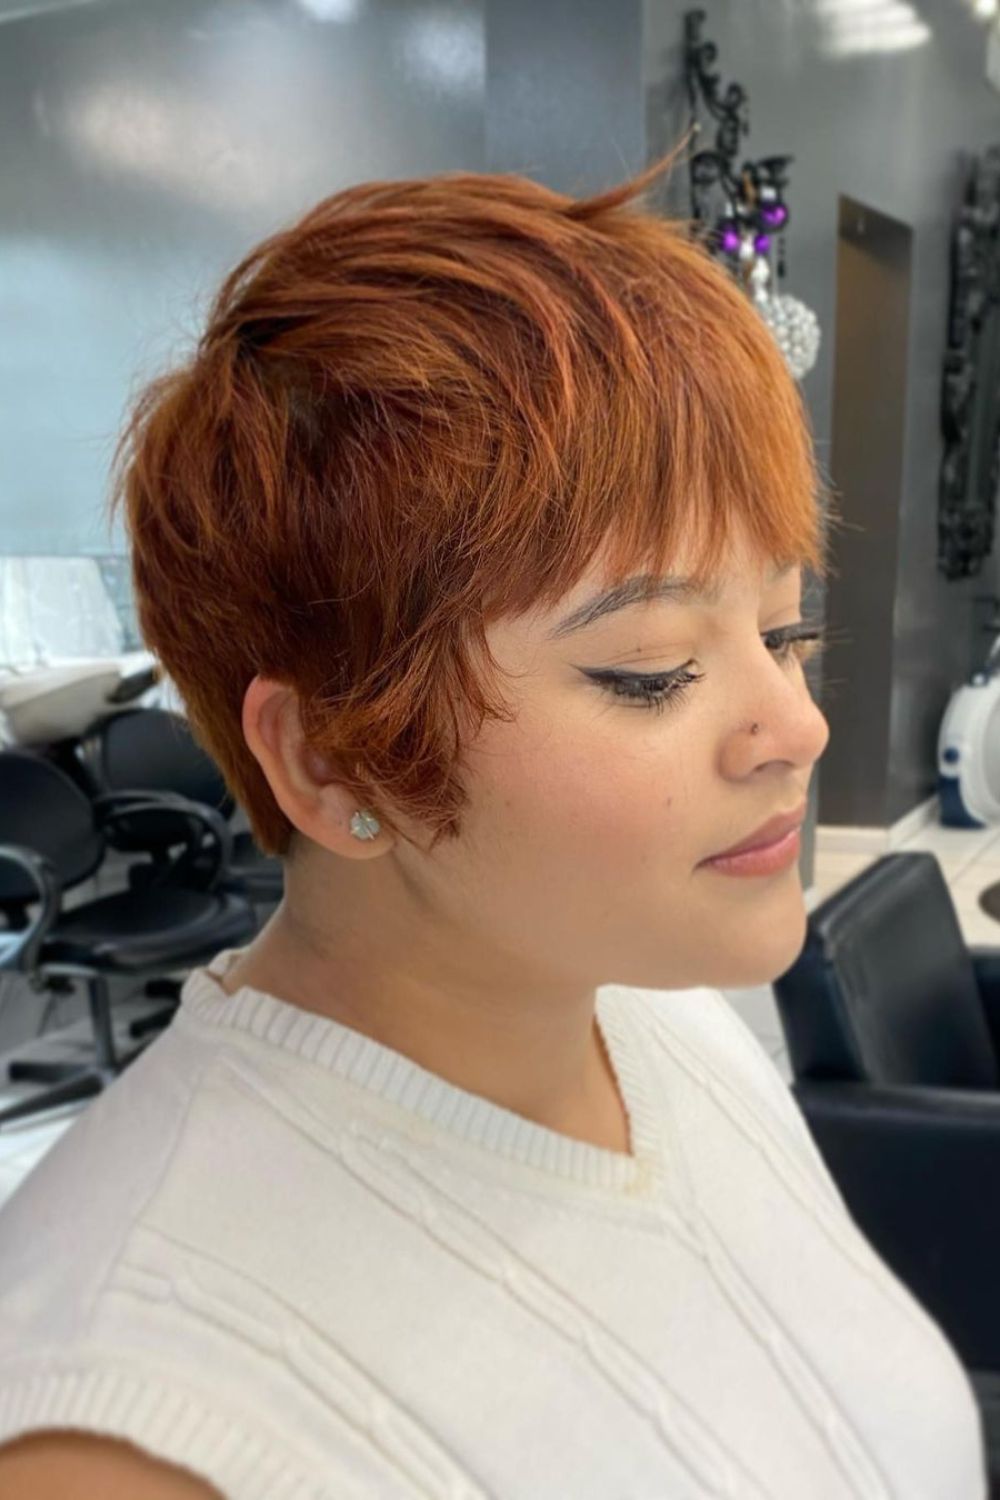 A woman with a copper shaggy pixie cut.